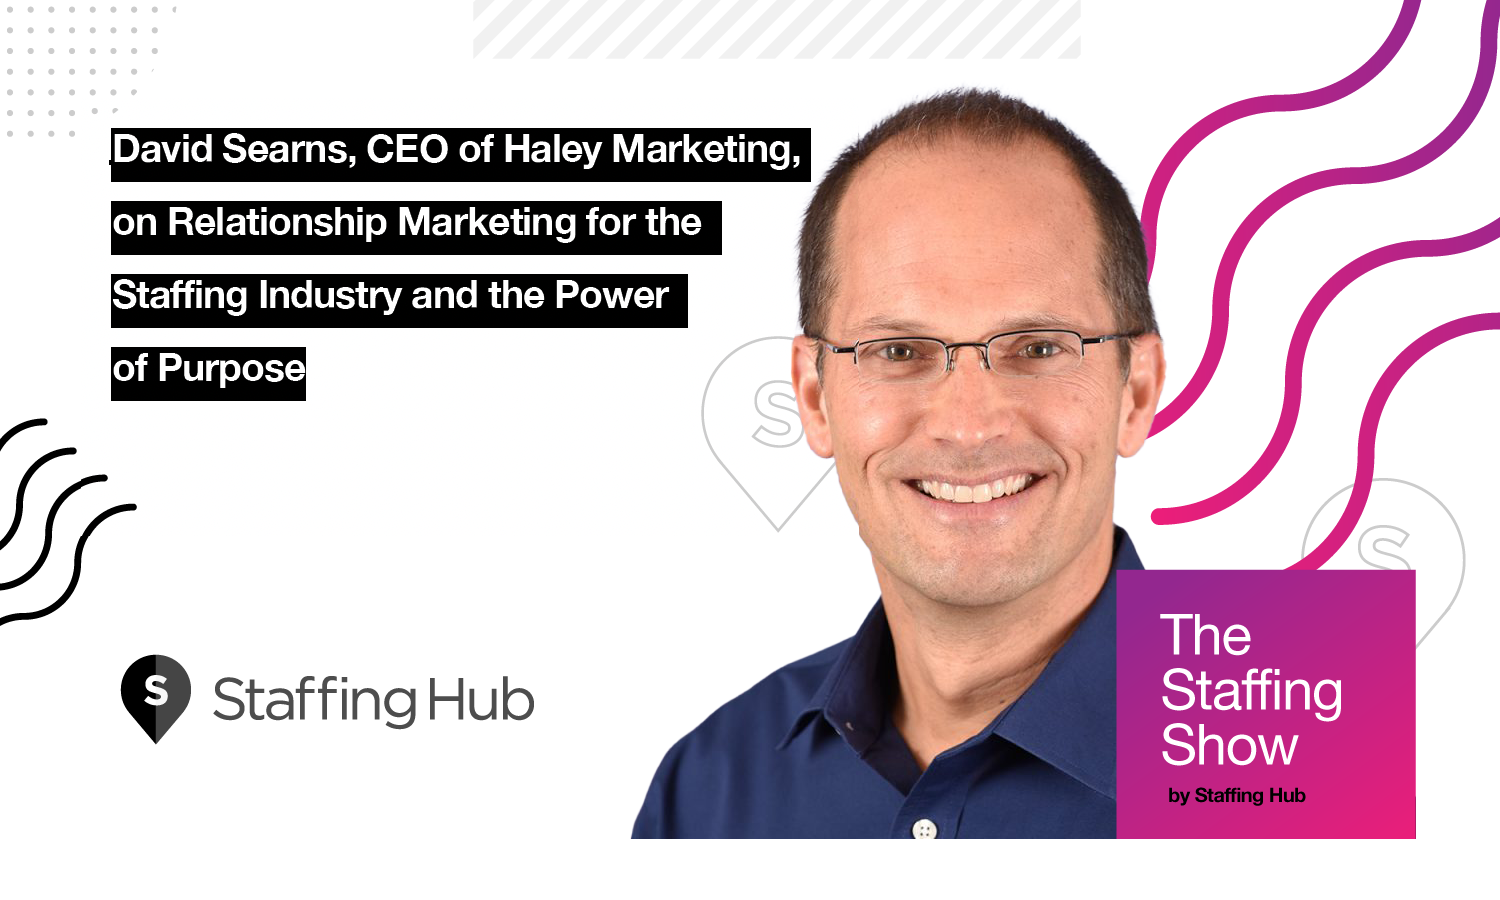 David Searns, CEO of Haley Marketing, on Relationship Marketing for the Staffing Industry and the Power of Purpose